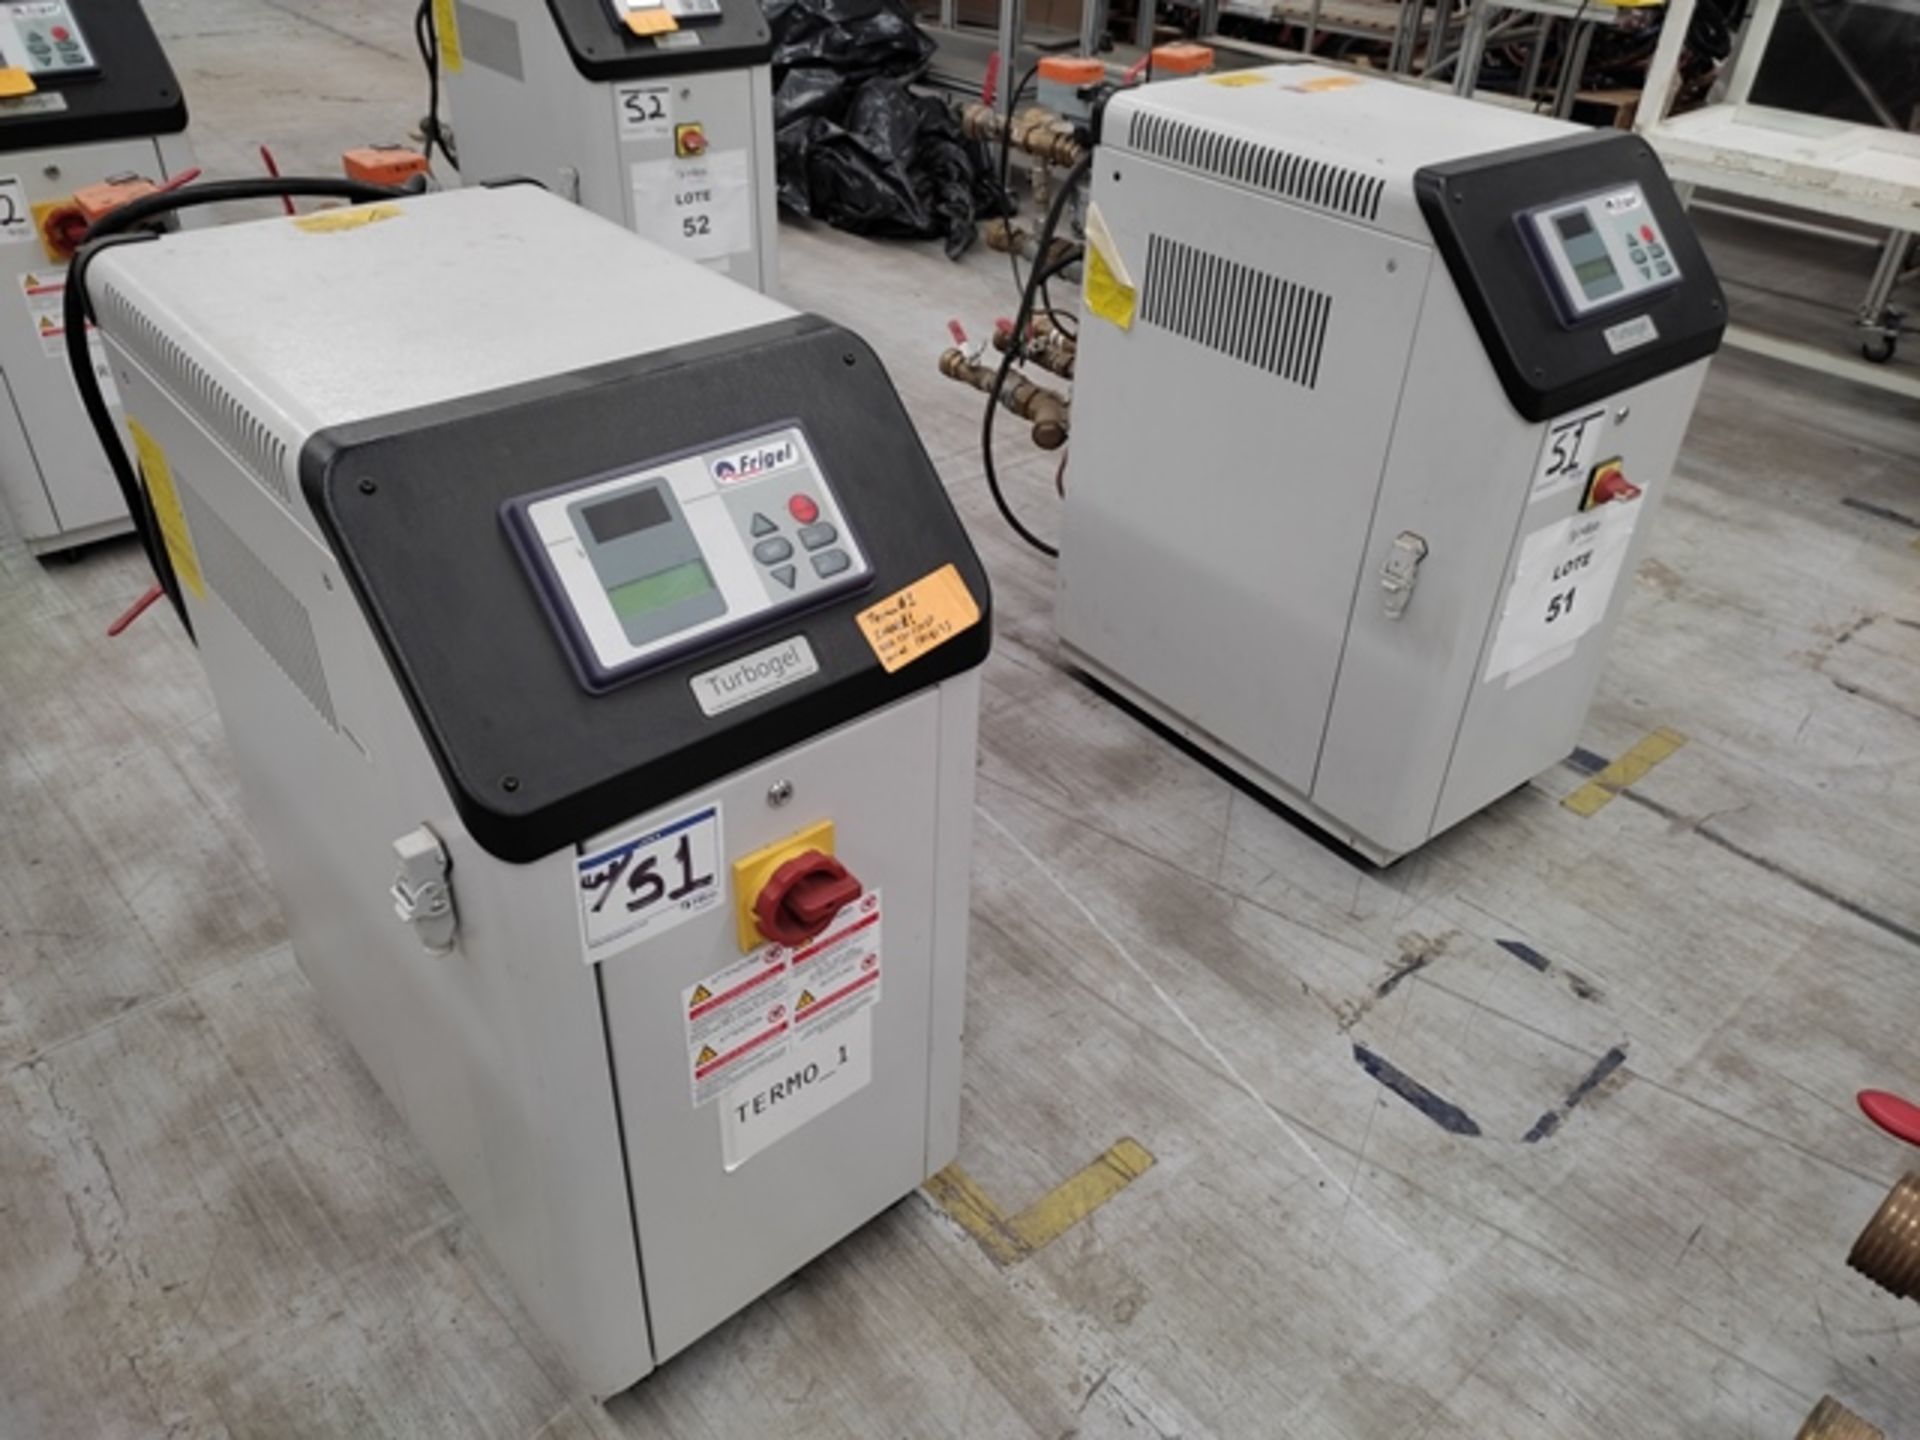 Lot of: (2) Frigel RBD130/24 SP 24 KW Flow Booster Temperature Controller, Mfg. Year: 2017 - Image 3 of 11